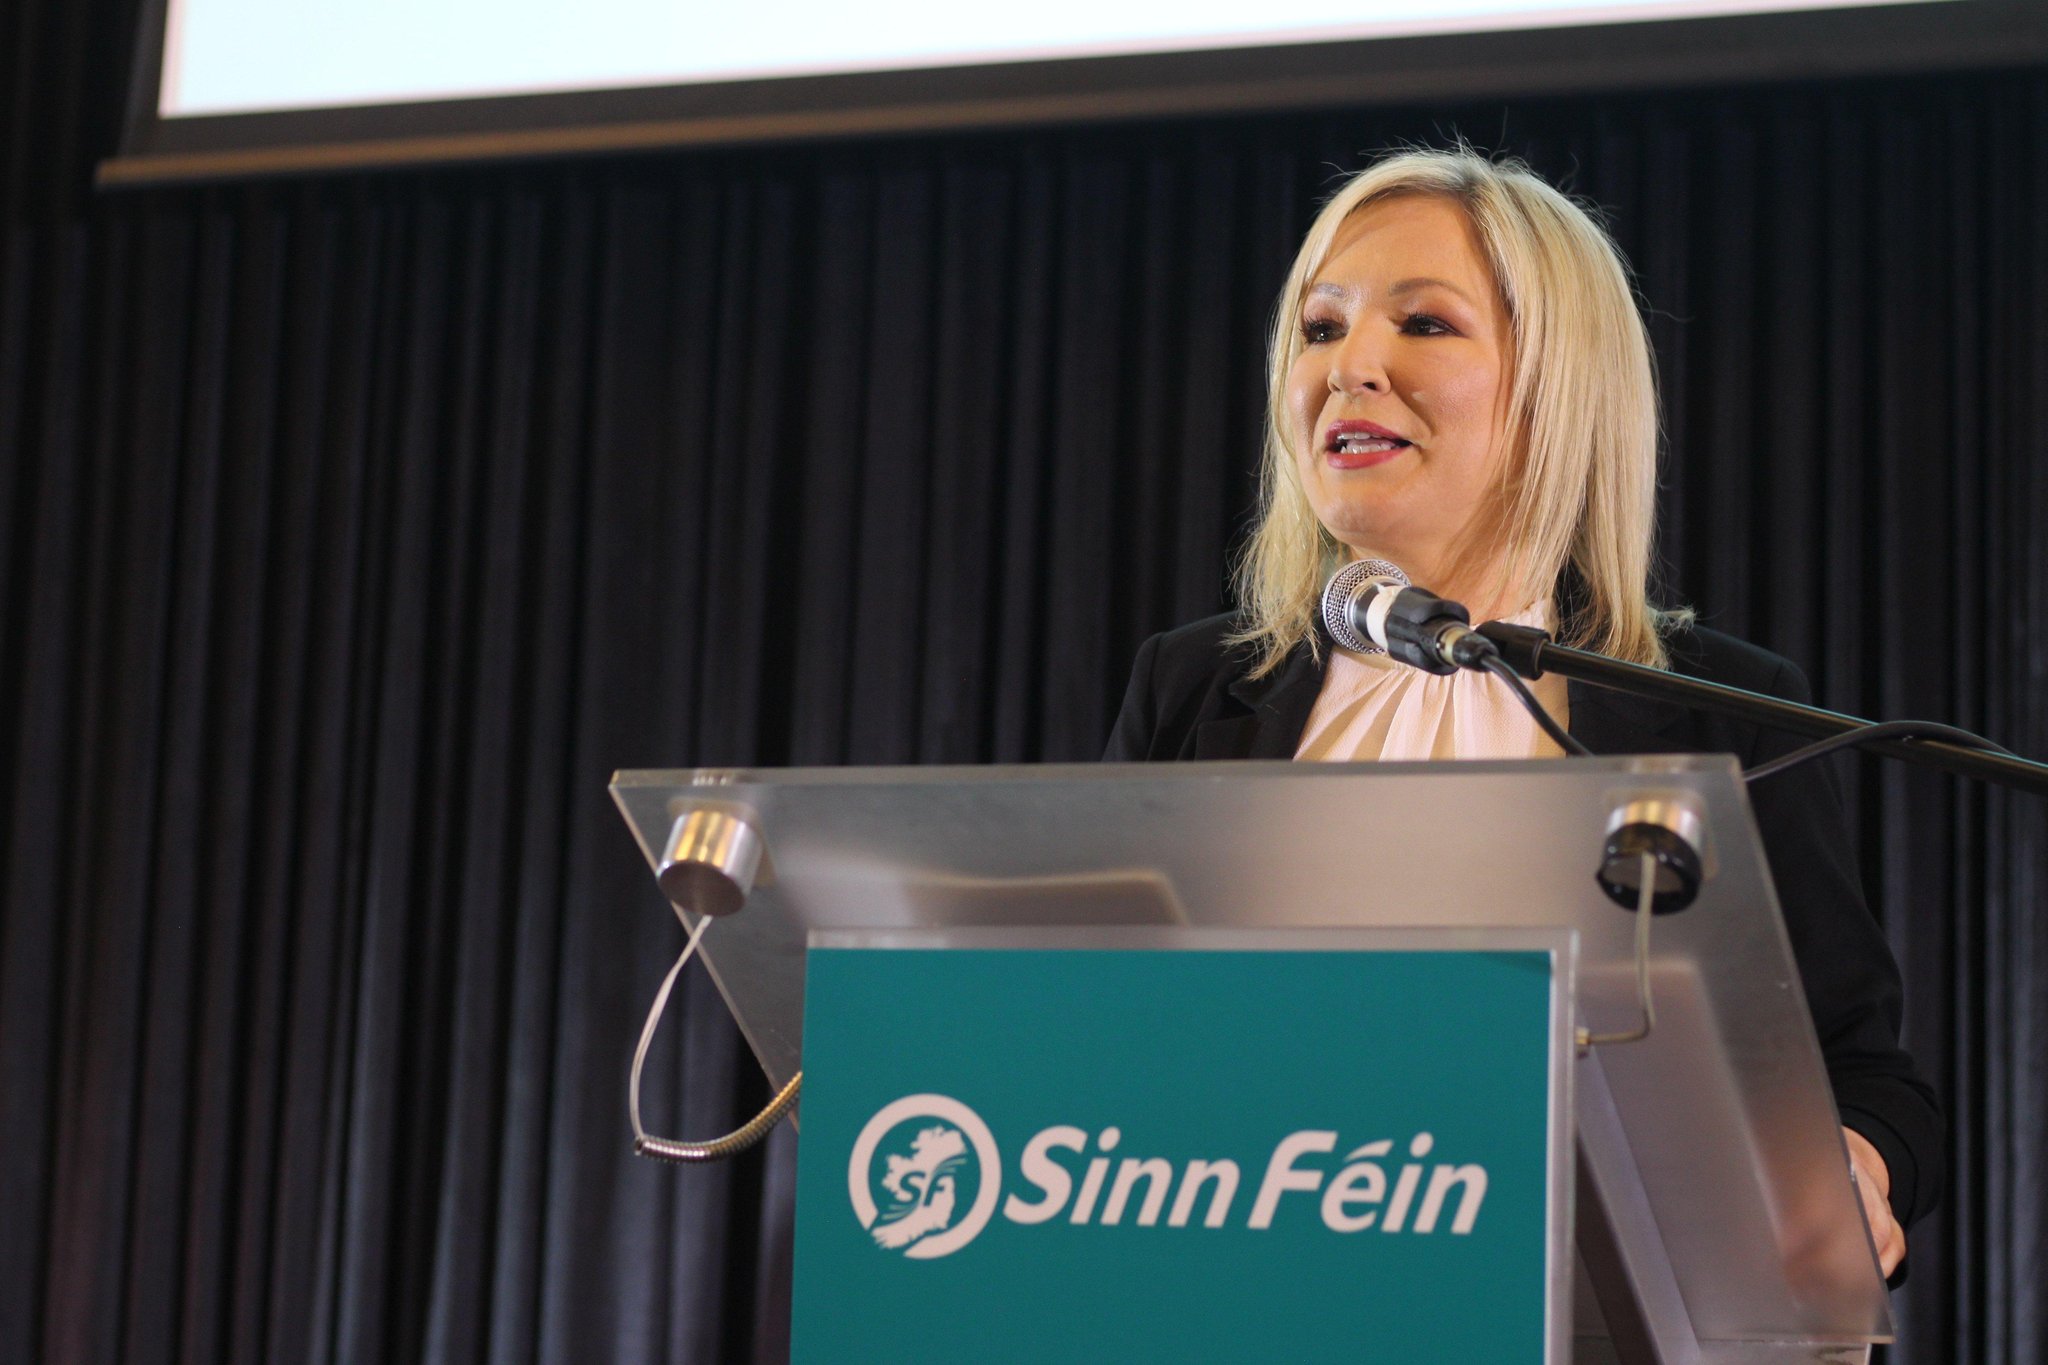 Michelle O'Neill blasts NI football manager's comments 'totally unacceptable'